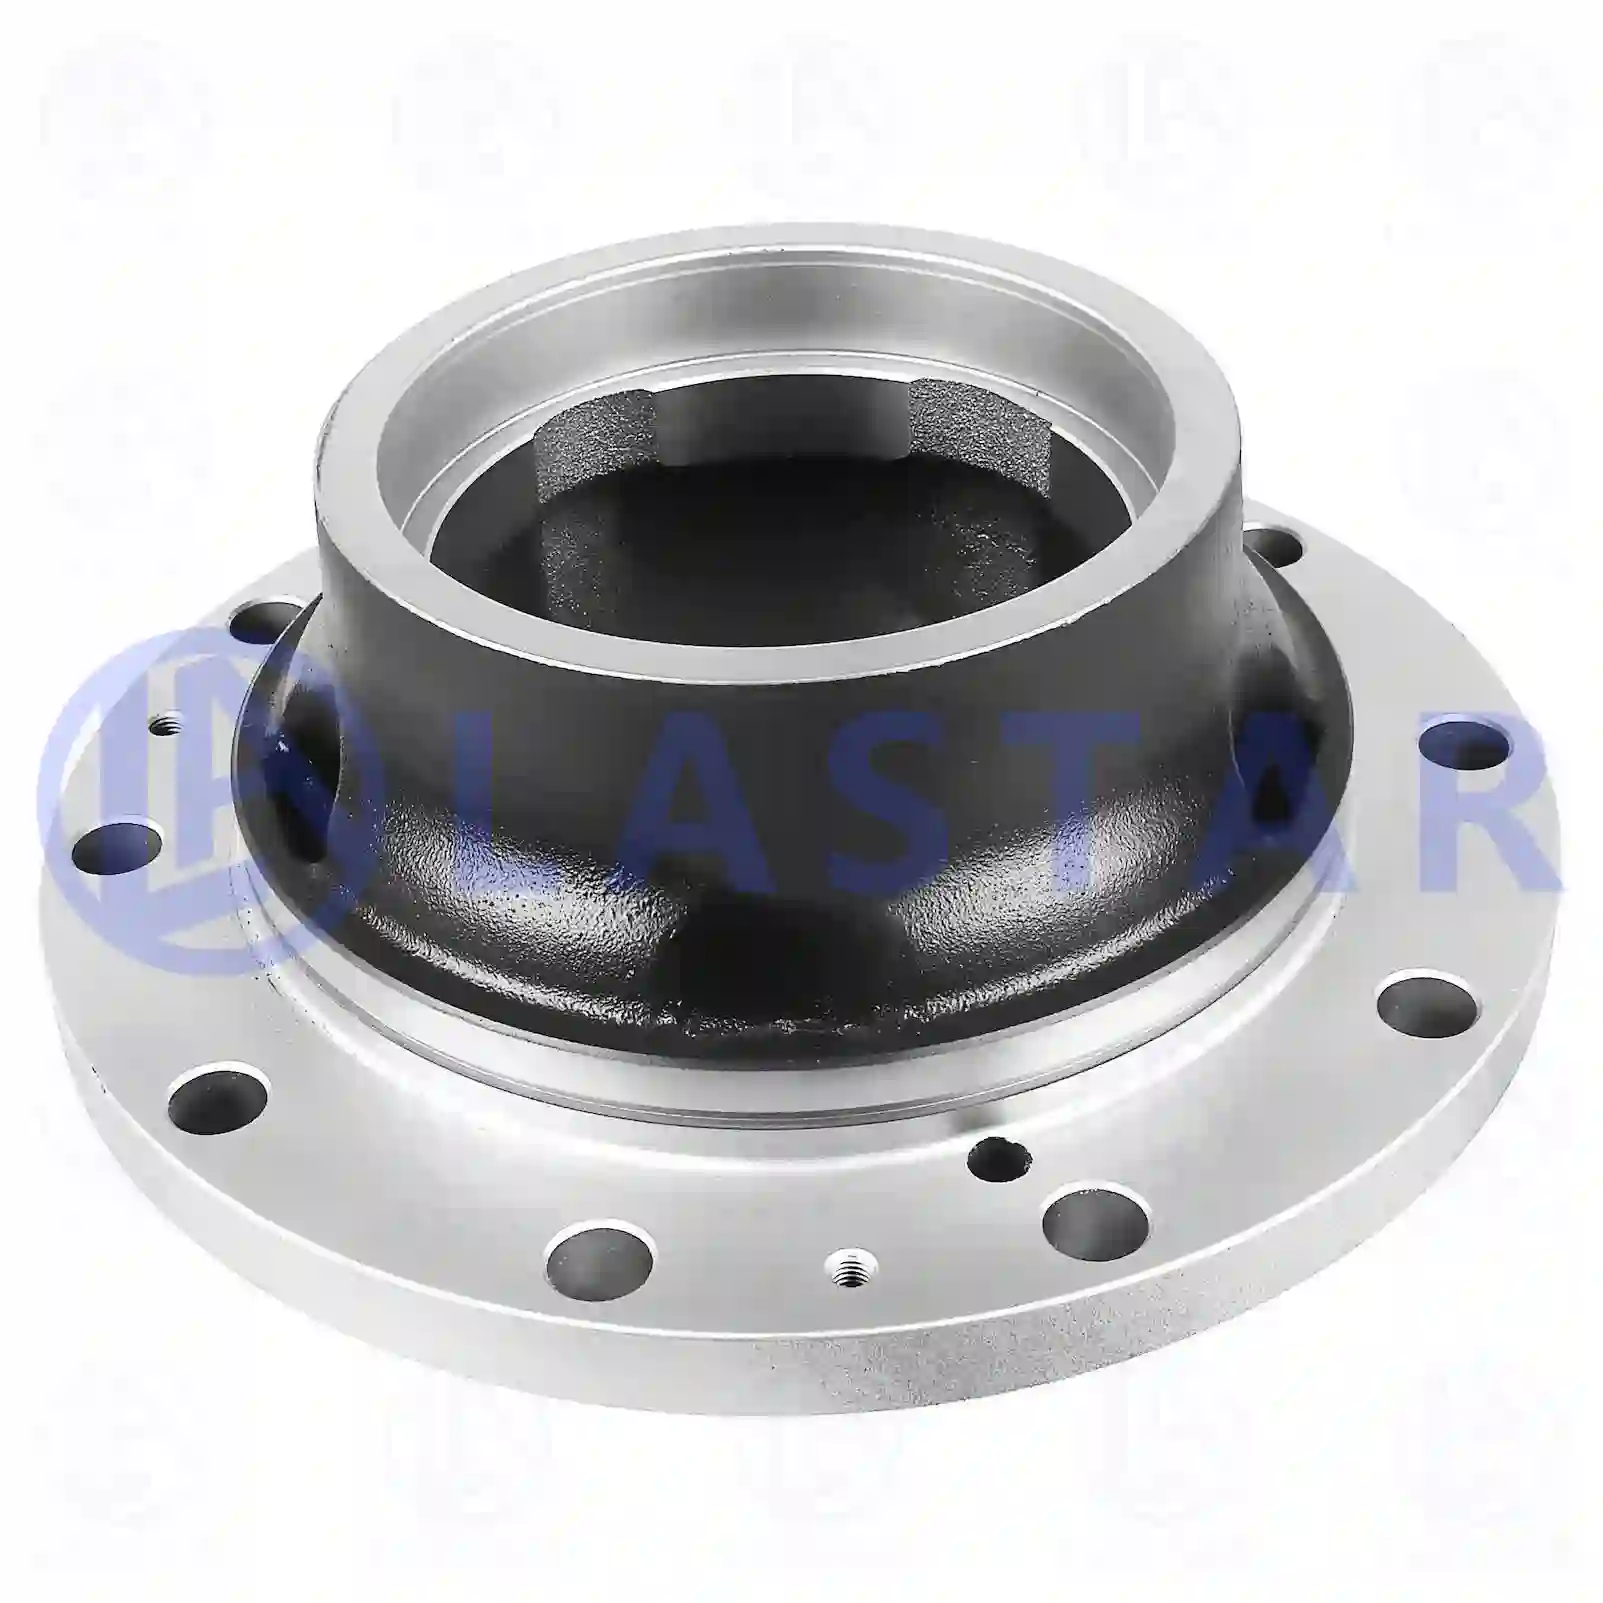 Wheel hub, without bearings, 77726682, 42104691, 42104692, , , , ||  77726682 Lastar Spare Part | Truck Spare Parts, Auotomotive Spare Parts Wheel hub, without bearings, 77726682, 42104691, 42104692, , , , ||  77726682 Lastar Spare Part | Truck Spare Parts, Auotomotive Spare Parts